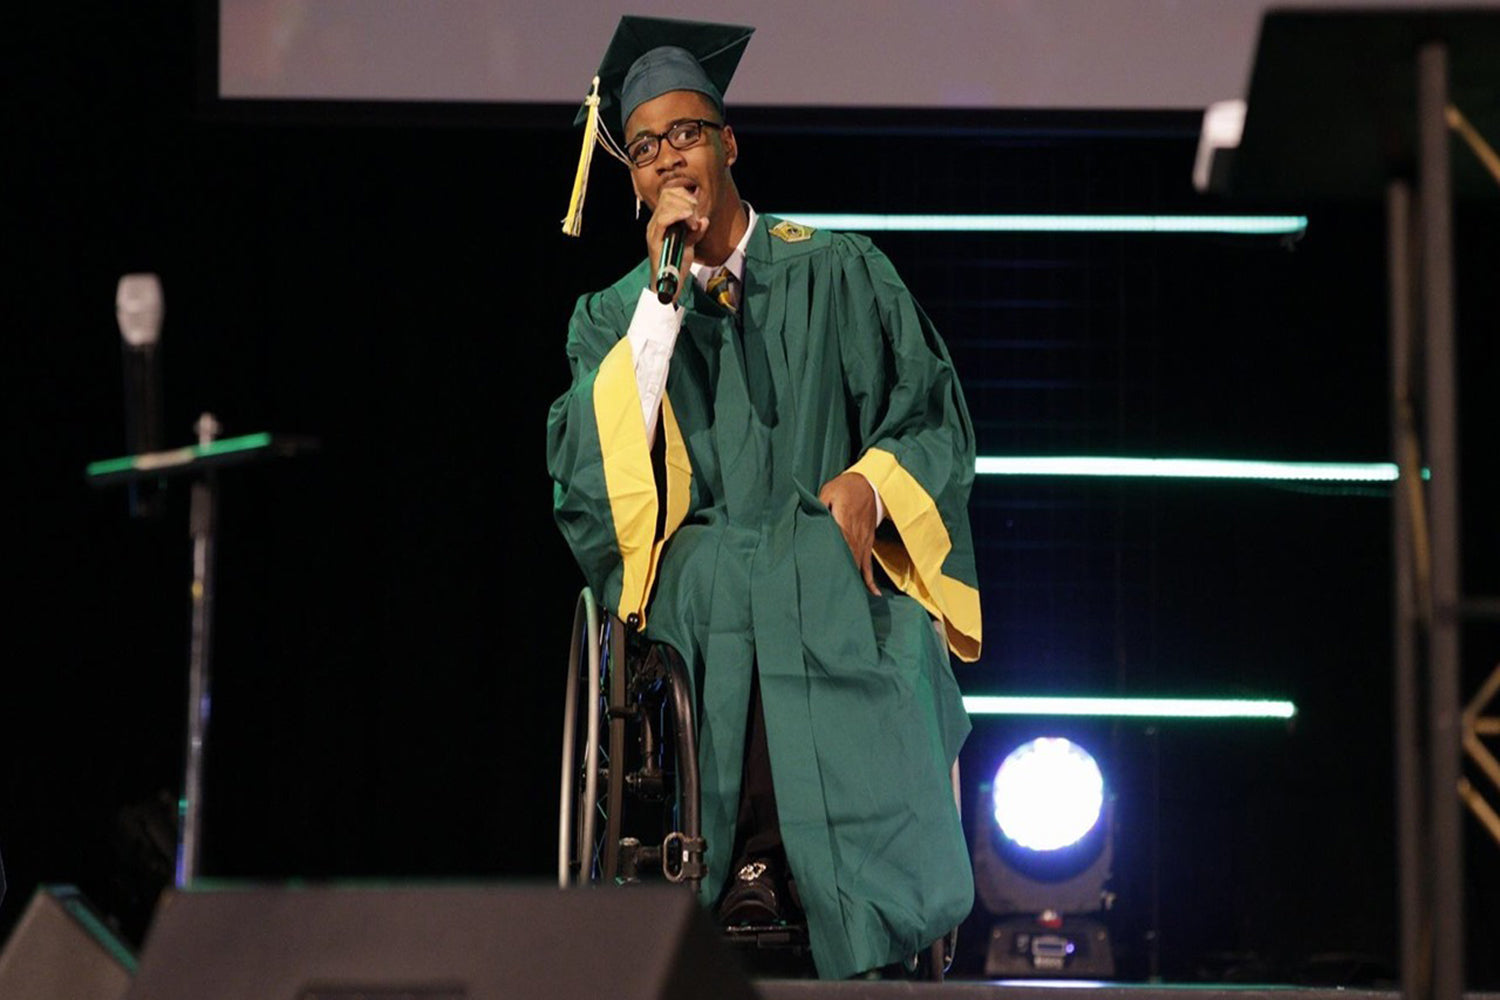 JACKSONVILLE TEEN WITH CEREBRAL PALSY WALK ACROSS THE STAGE AT GRADUATION CEREMONY